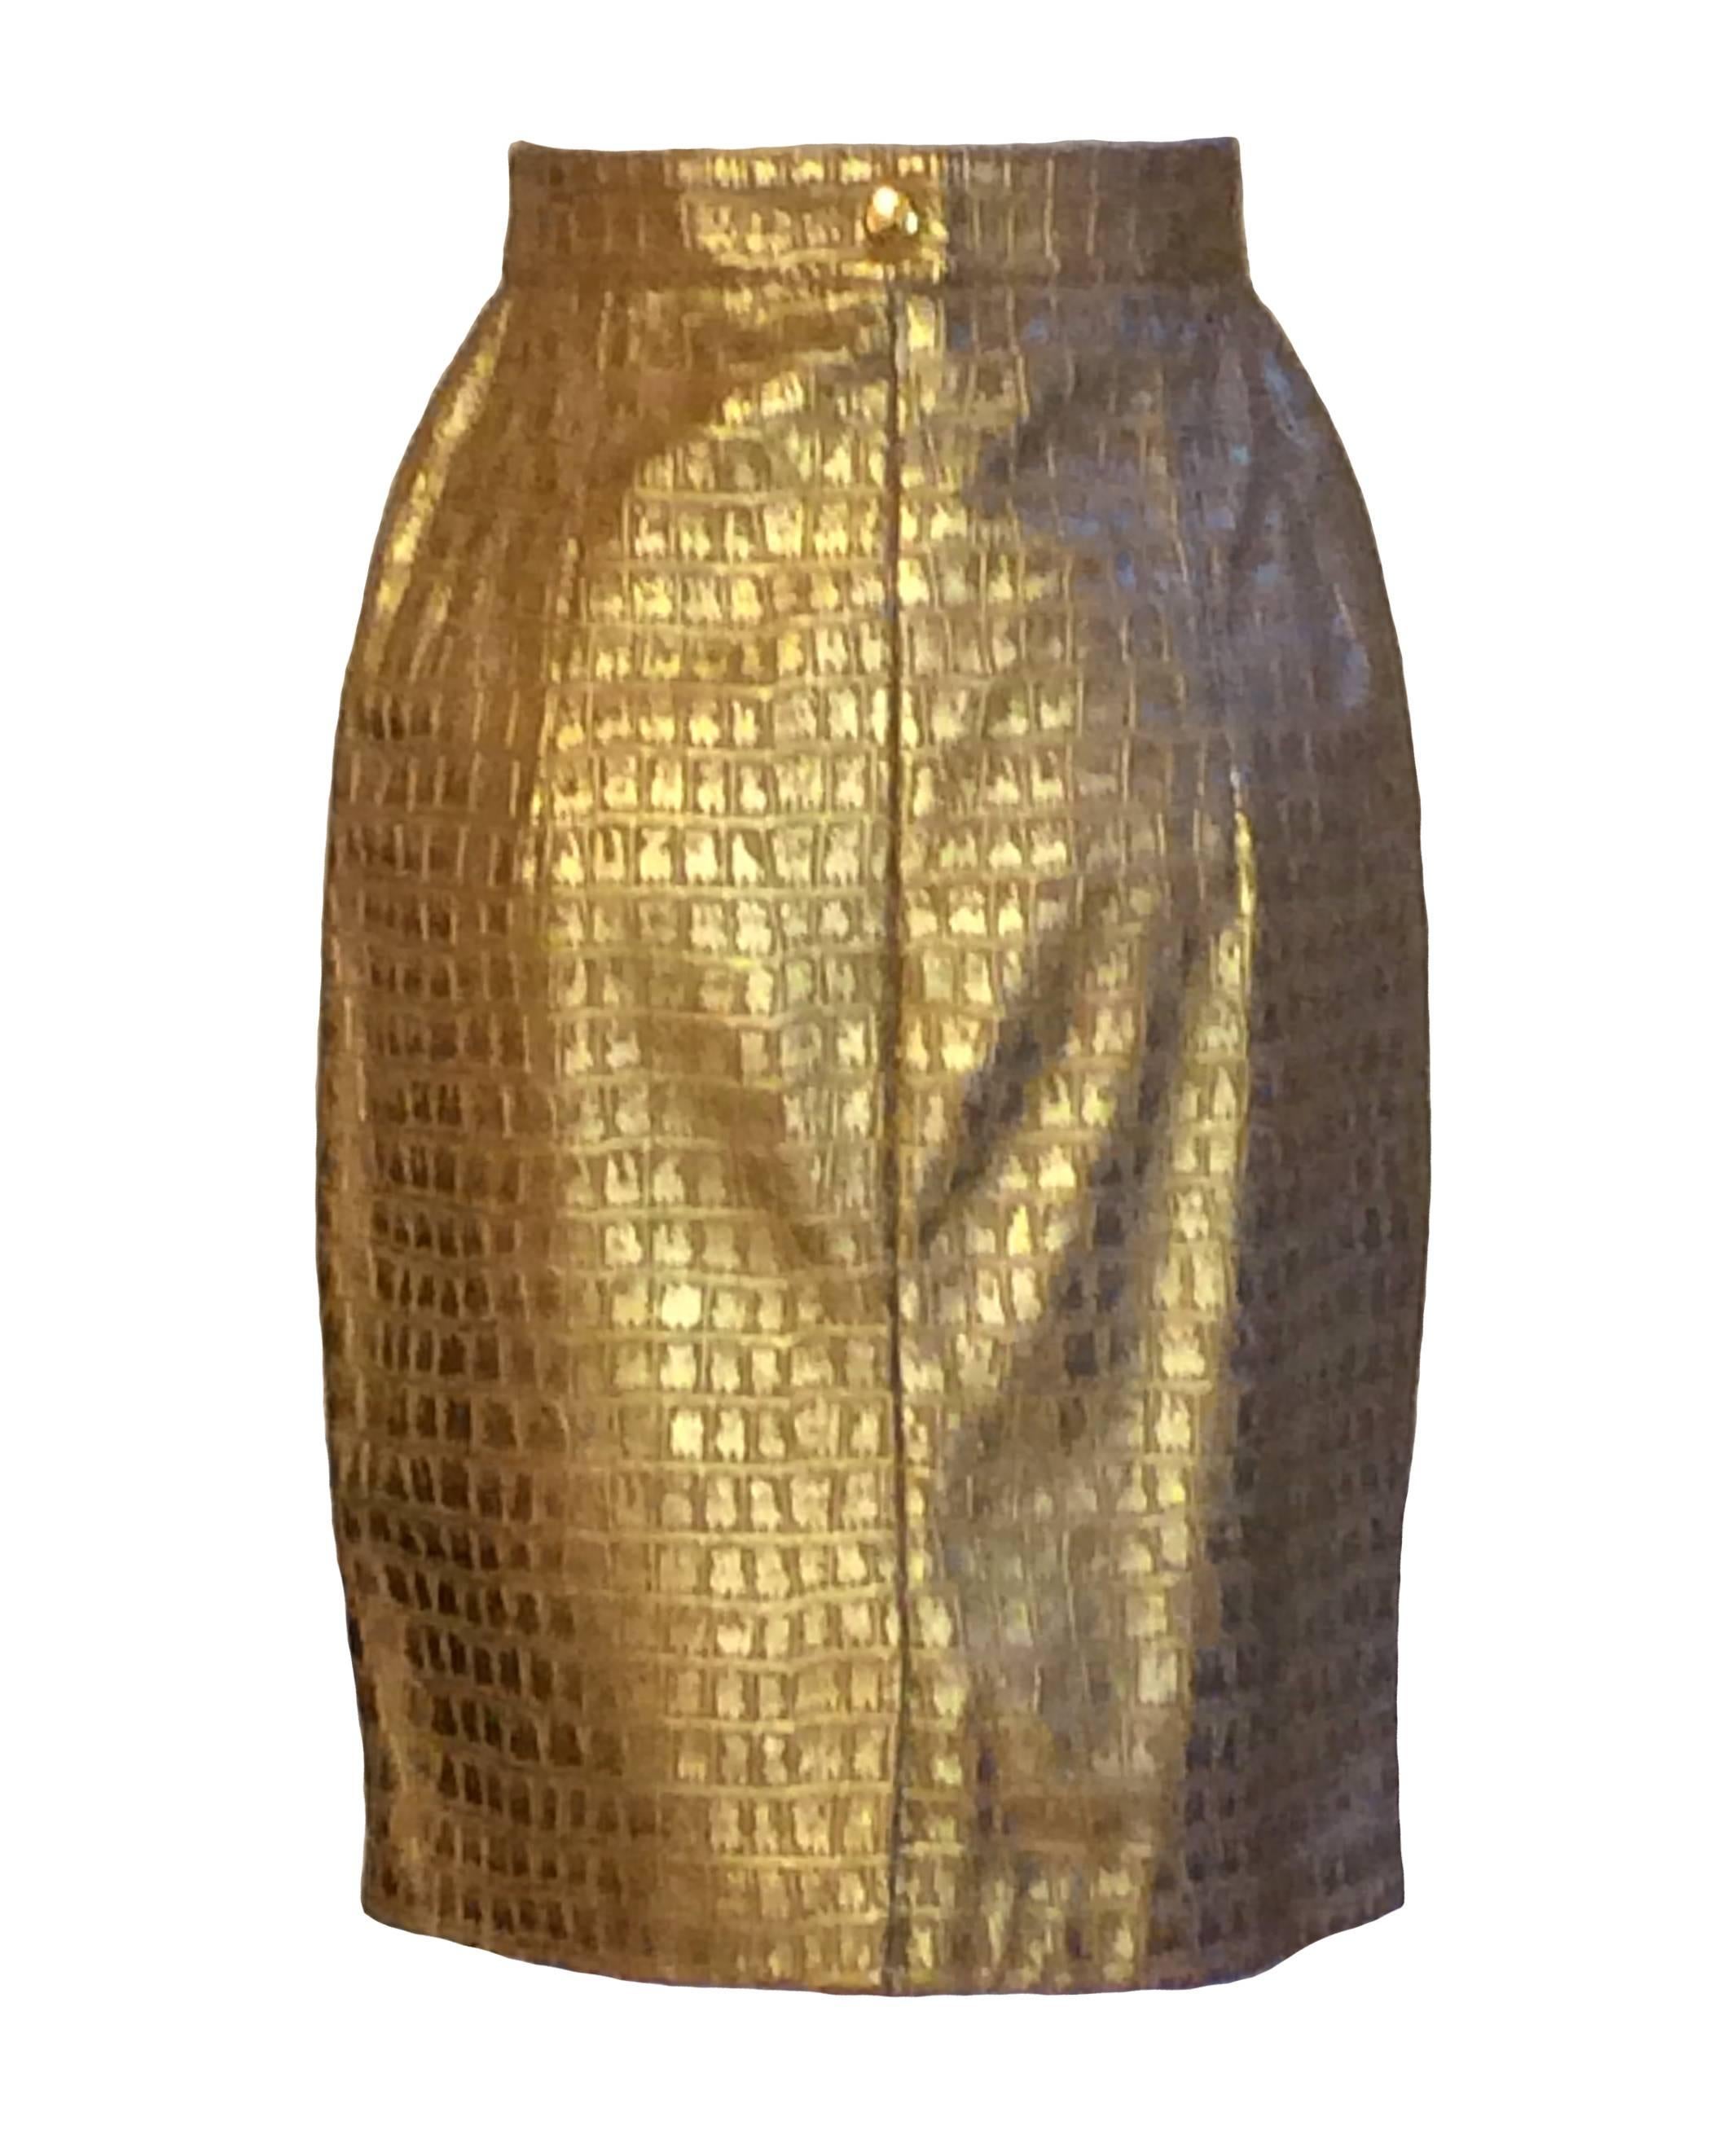 Escada by Margaretha Ley vintage 1980s leather skirt with metallic gold crocodile embossing. Back zip and snap.

Made in Germany.

Size FR 34, approximately US 2. 
Waist 25 1/2